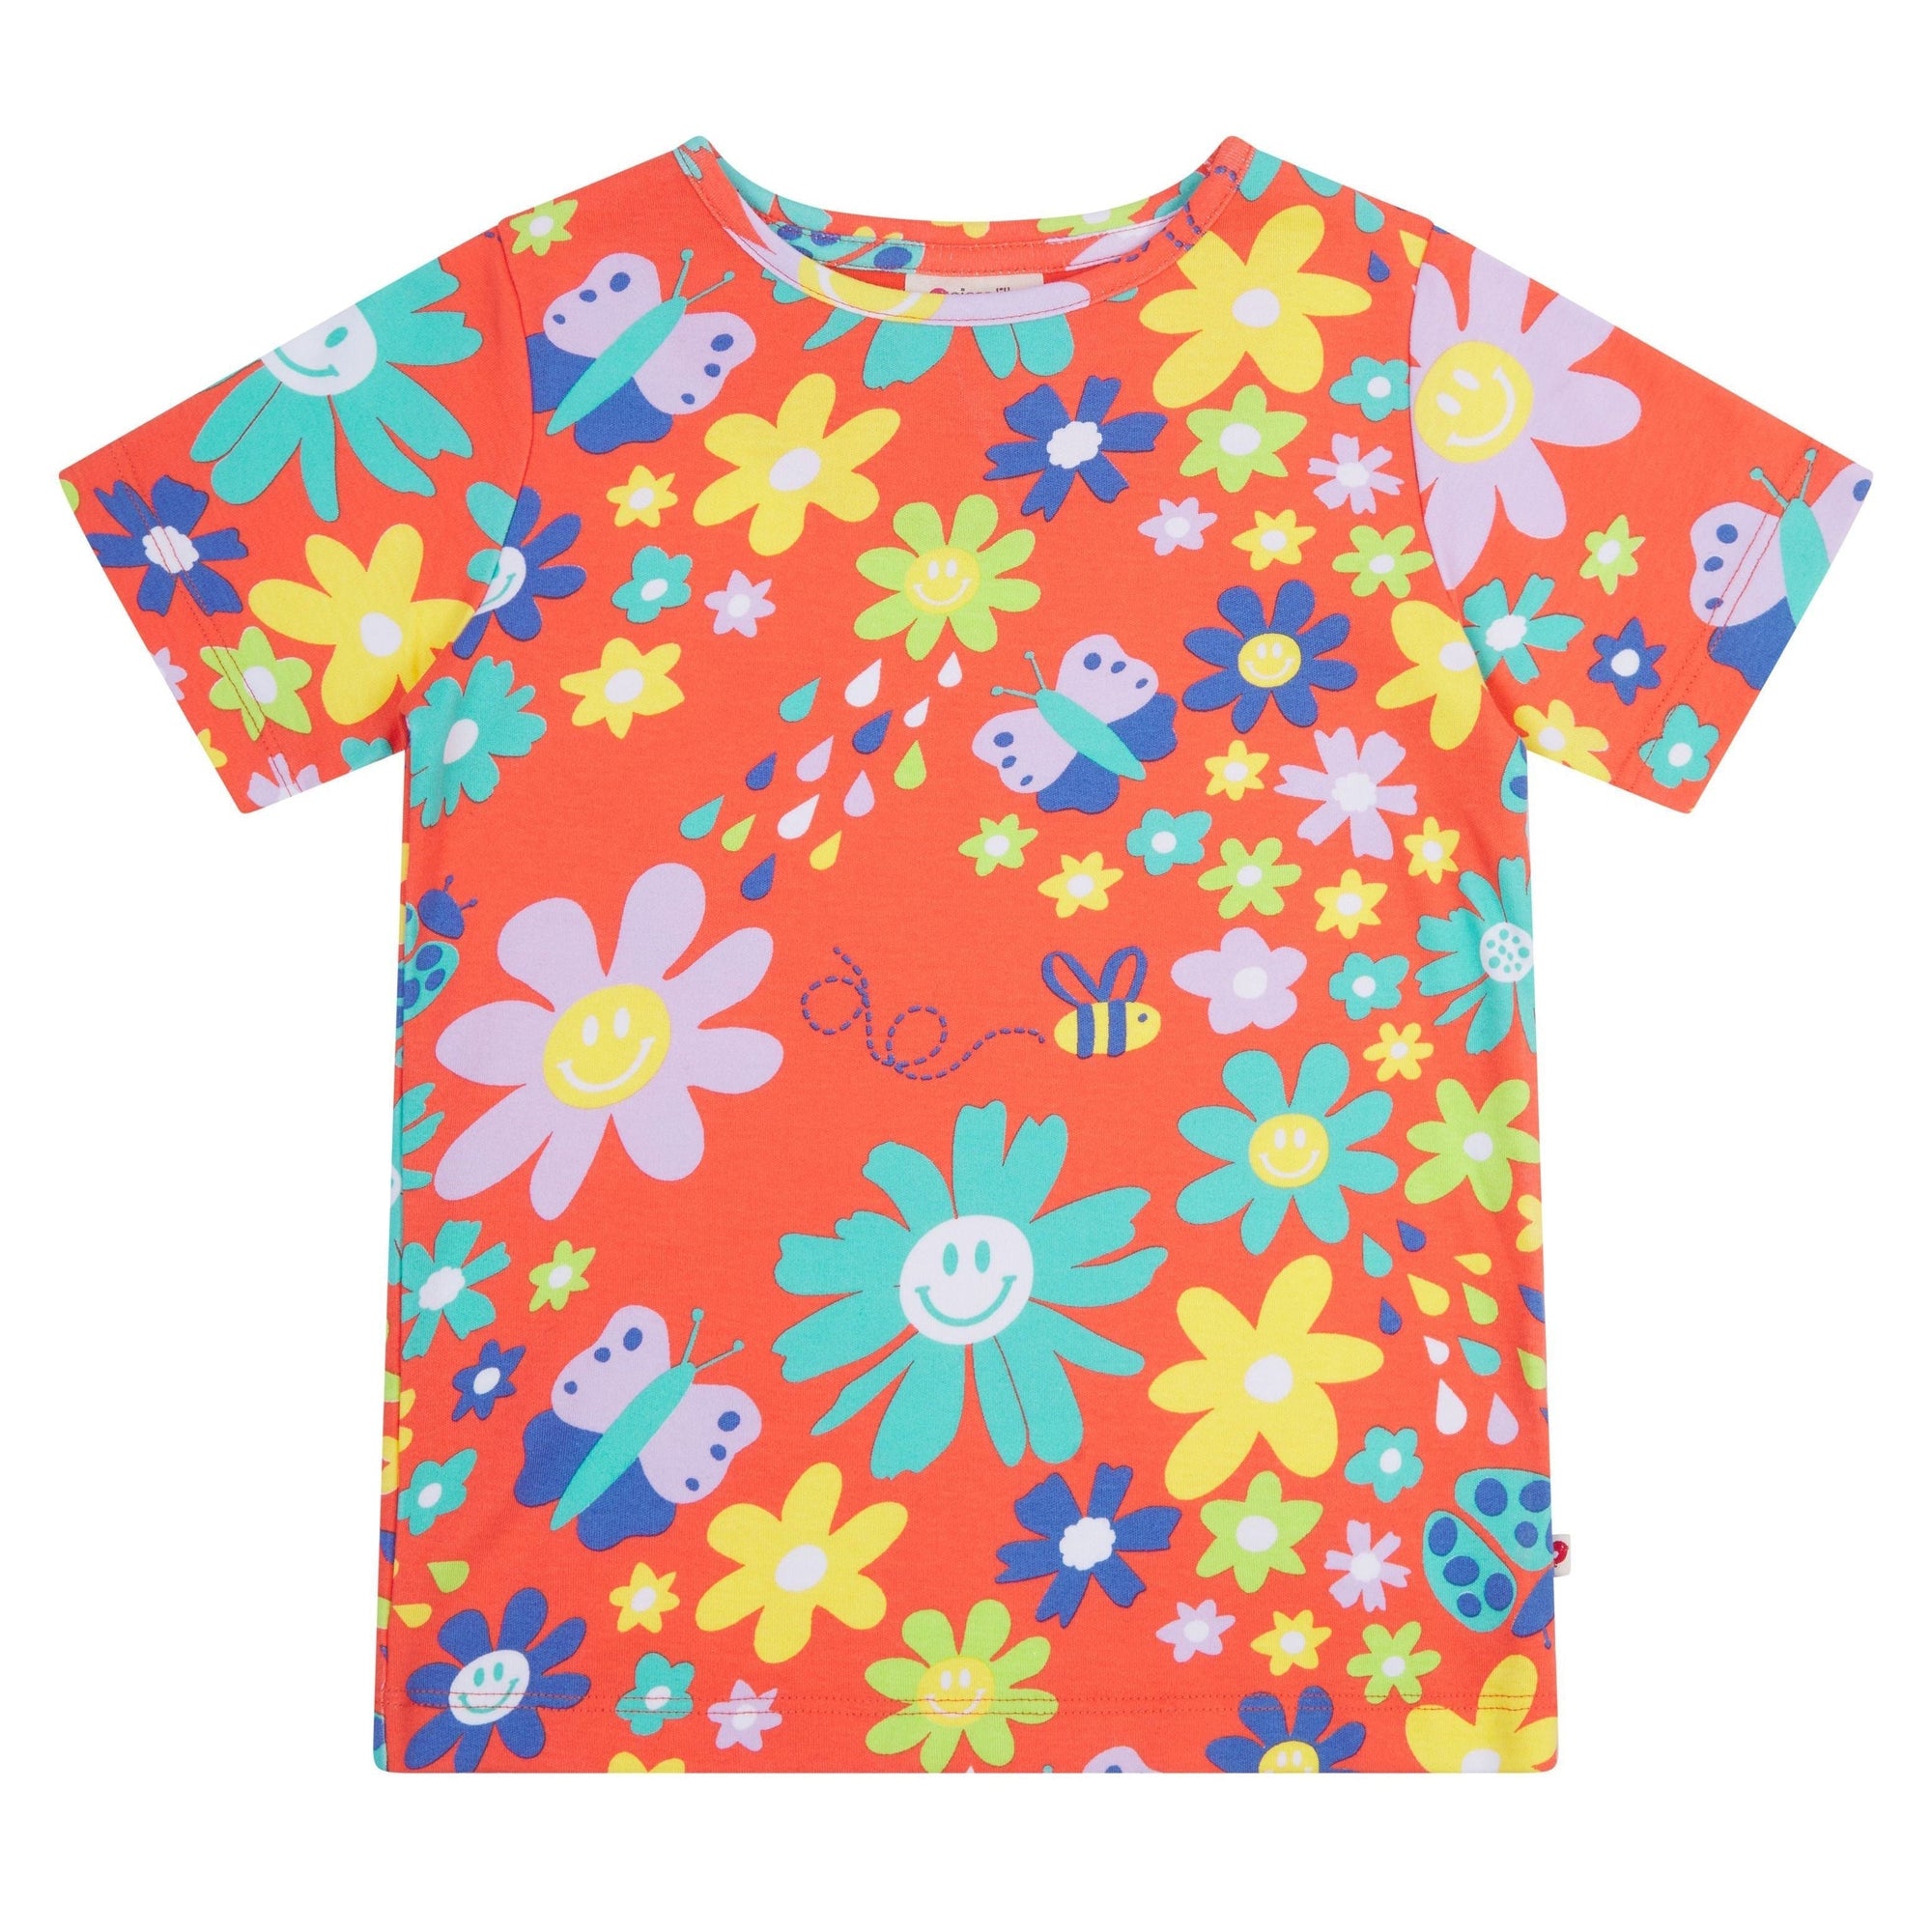 Flower Power Short Sleeve Shirt - 1 Left Size 5-6 years-Piccalilly-Modern Rascals